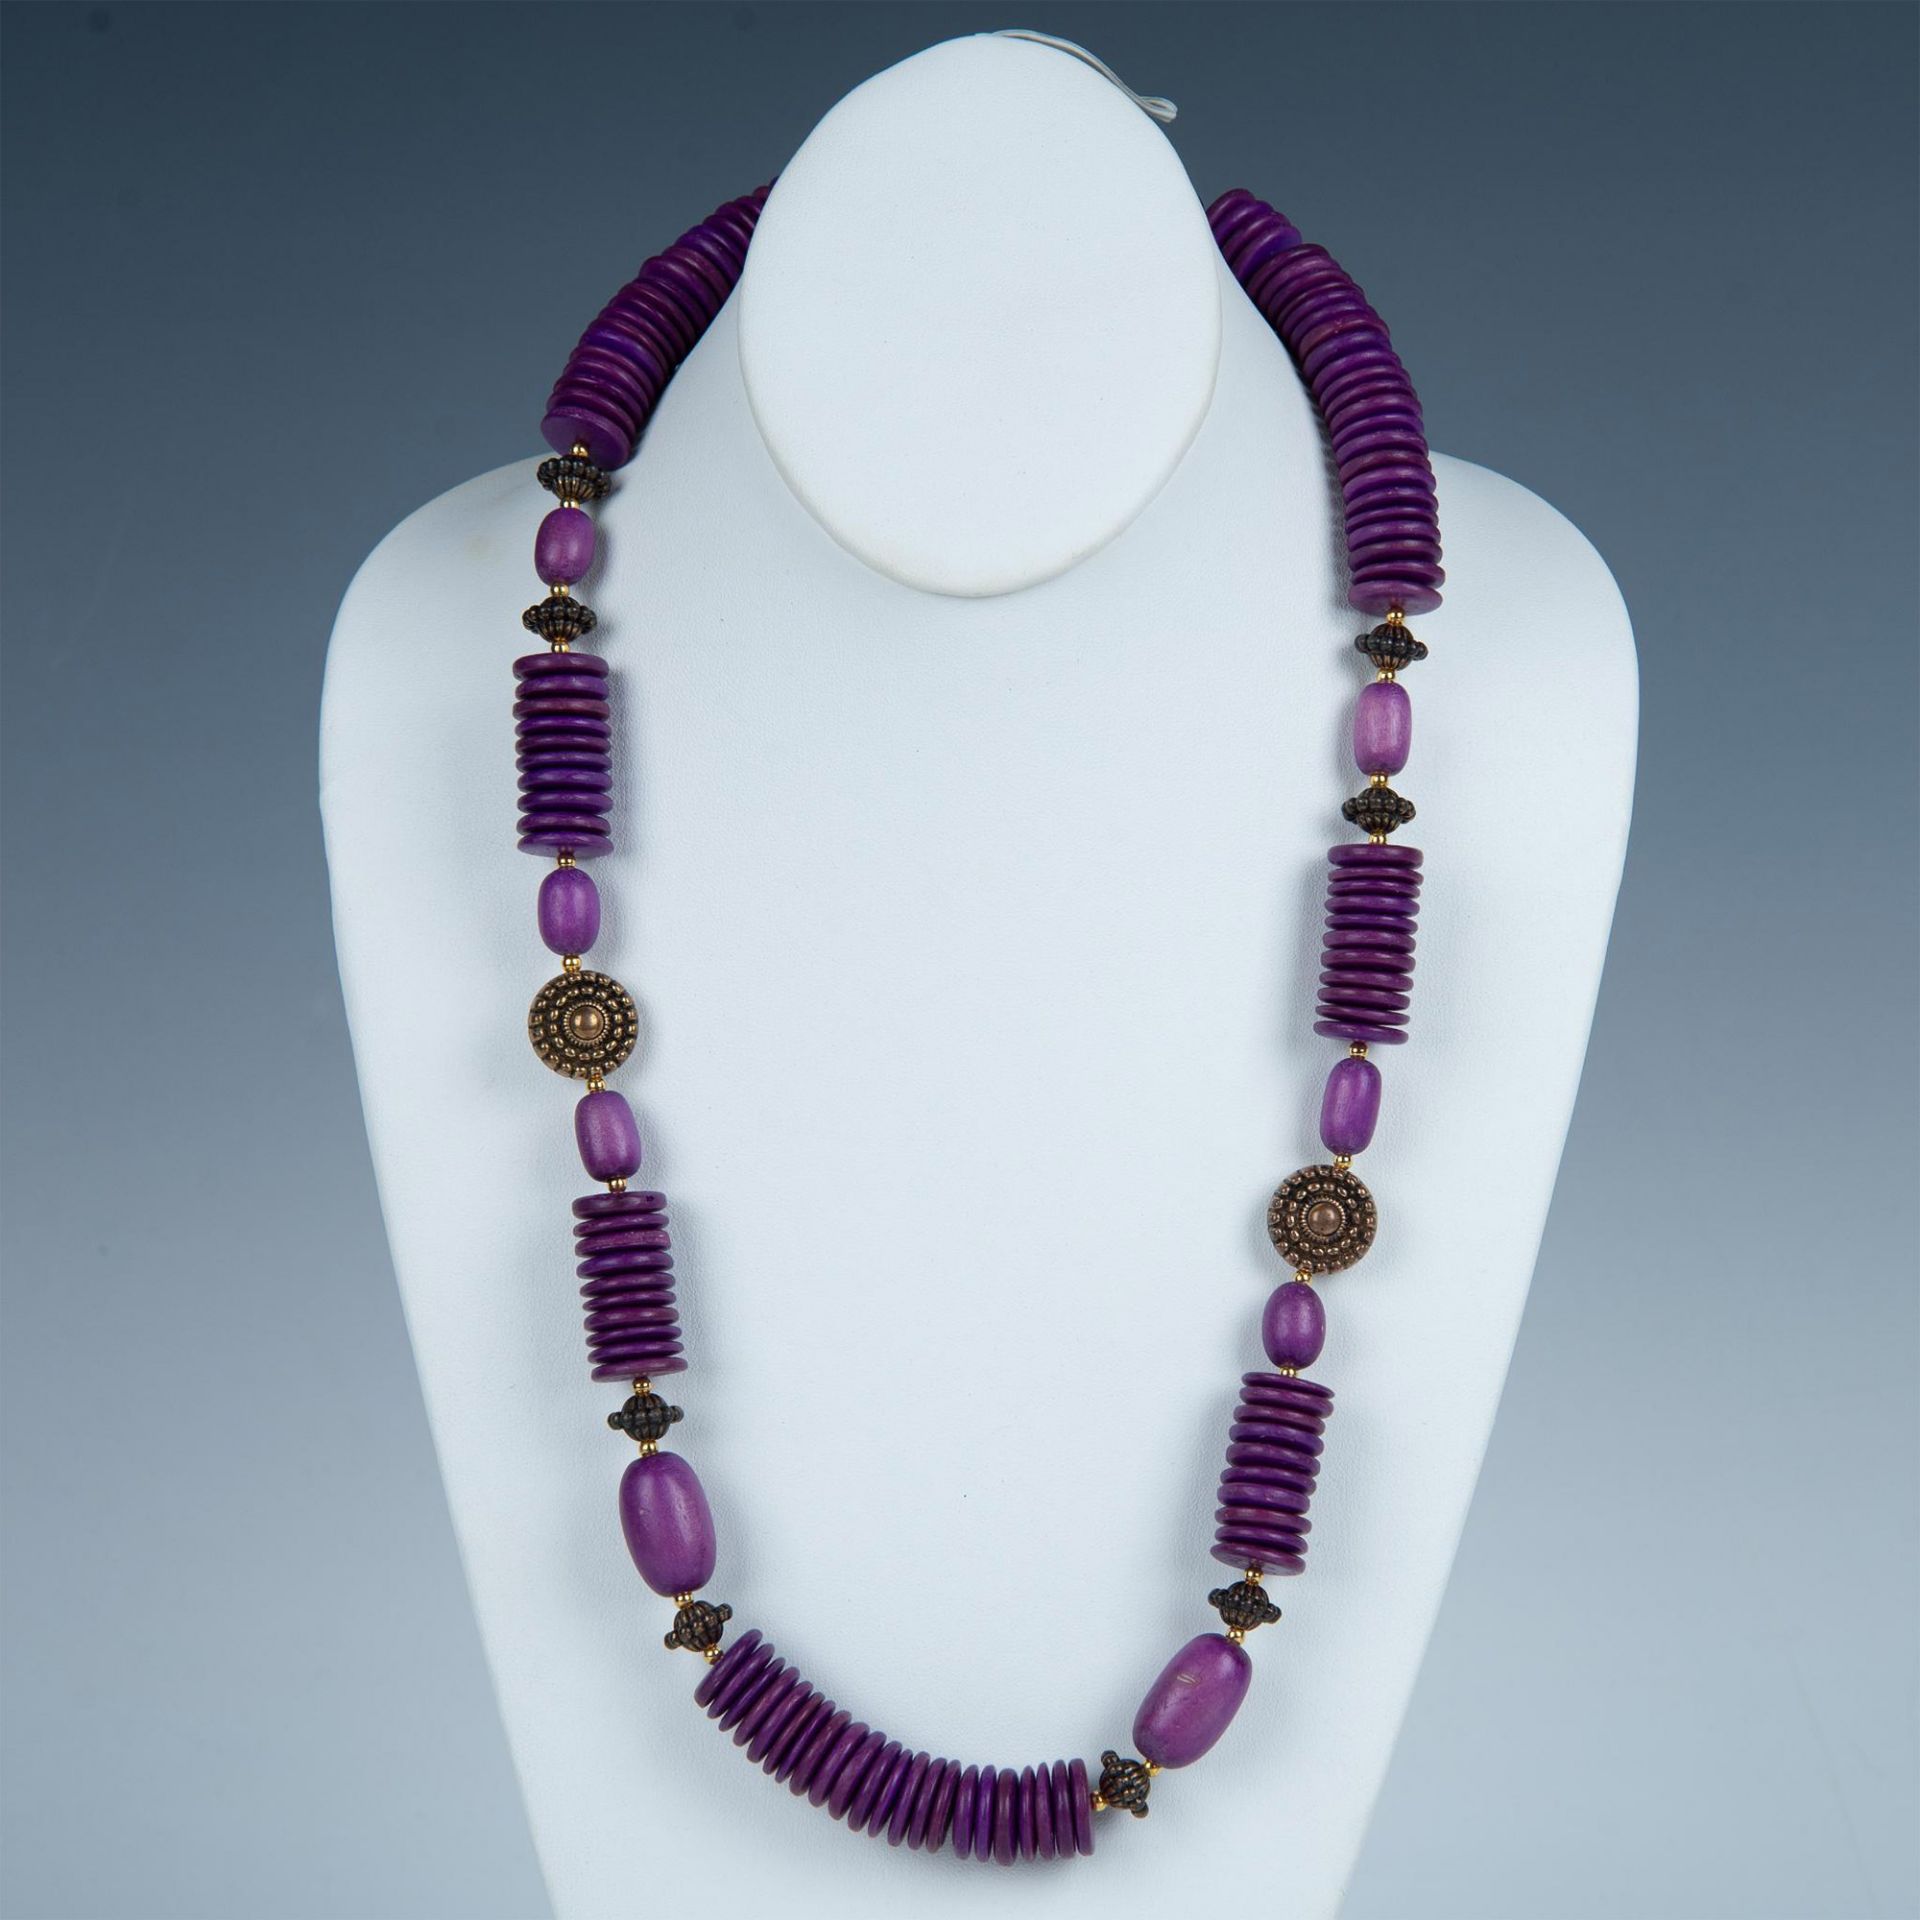 Beautiful Gold and Copper Tone Purple Wood Bead Necklace